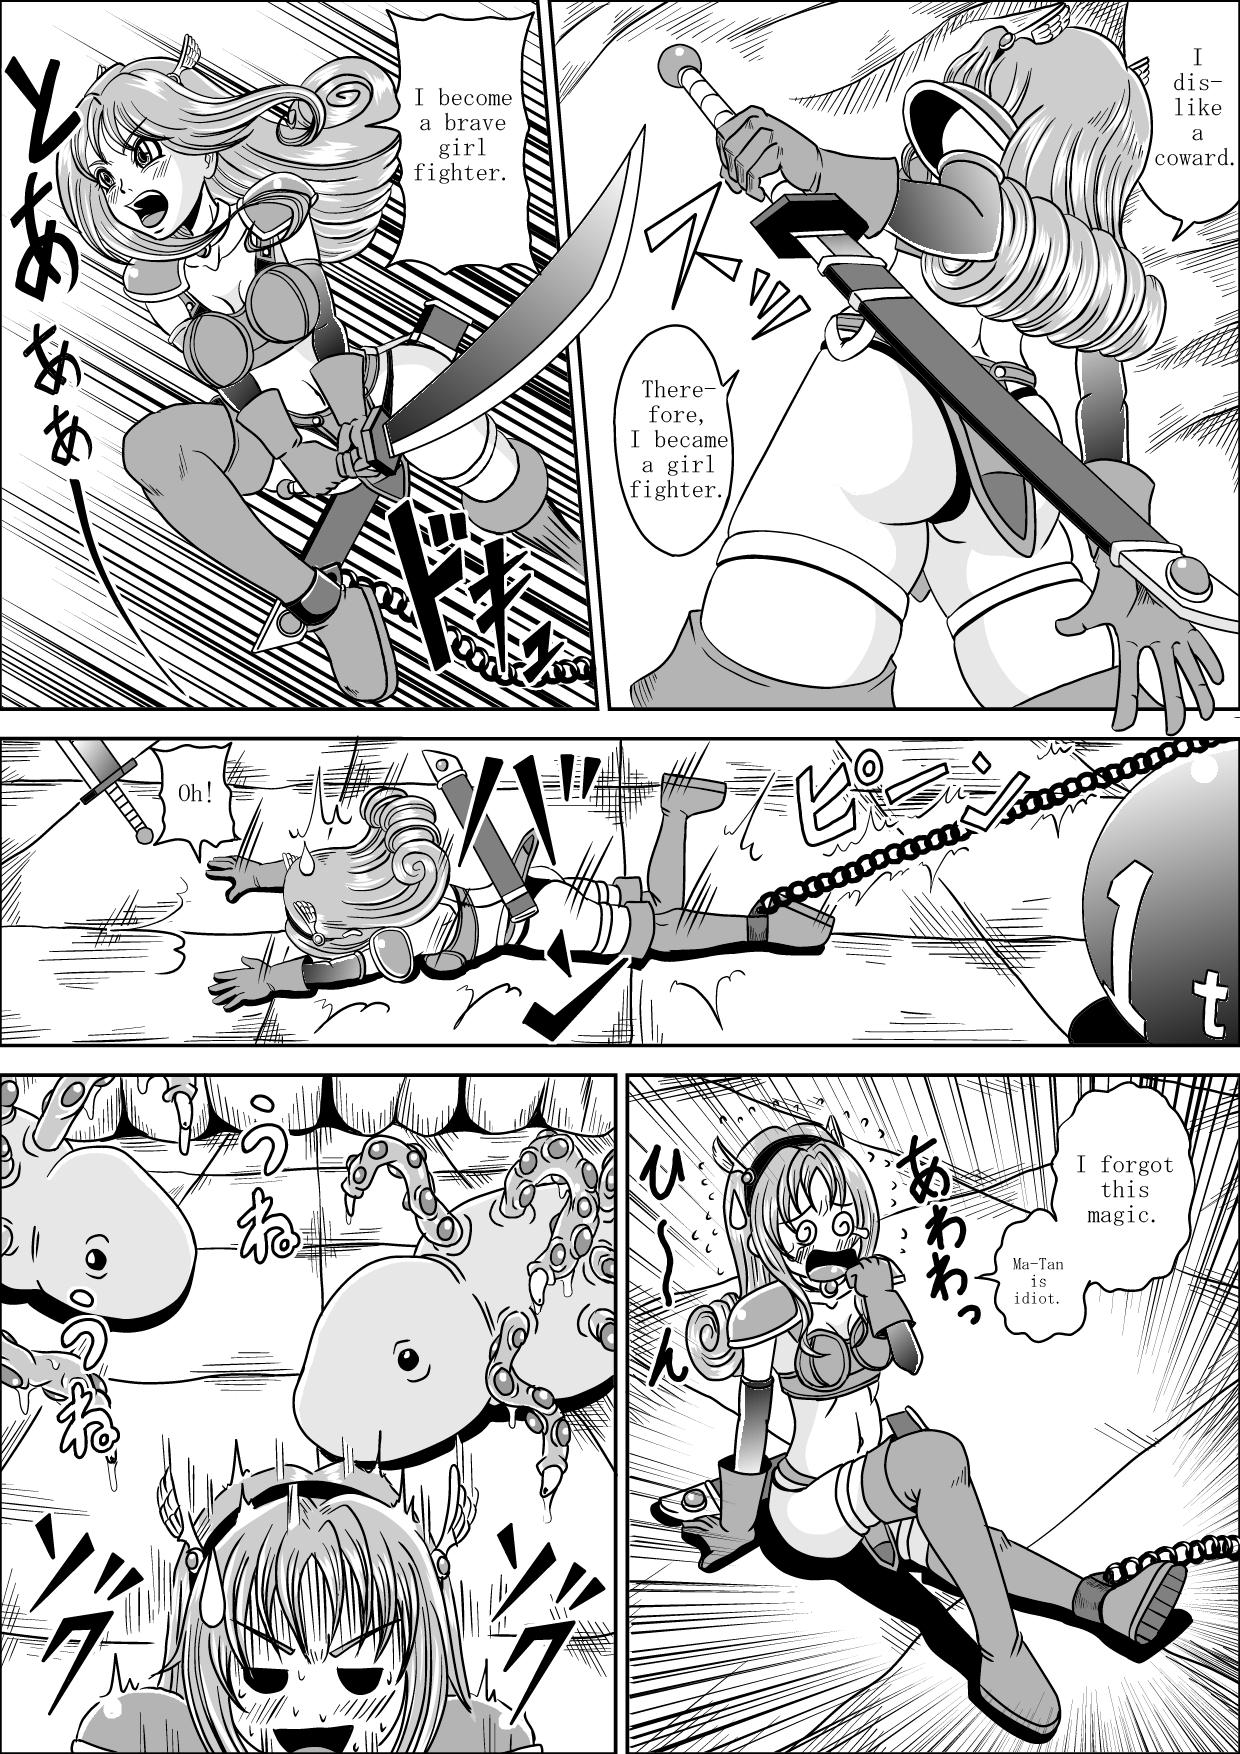 Head A FAINTHEARTED GIRL FIGHTER CHI-CHAN'S ADVENTURE Mofos - Page 9